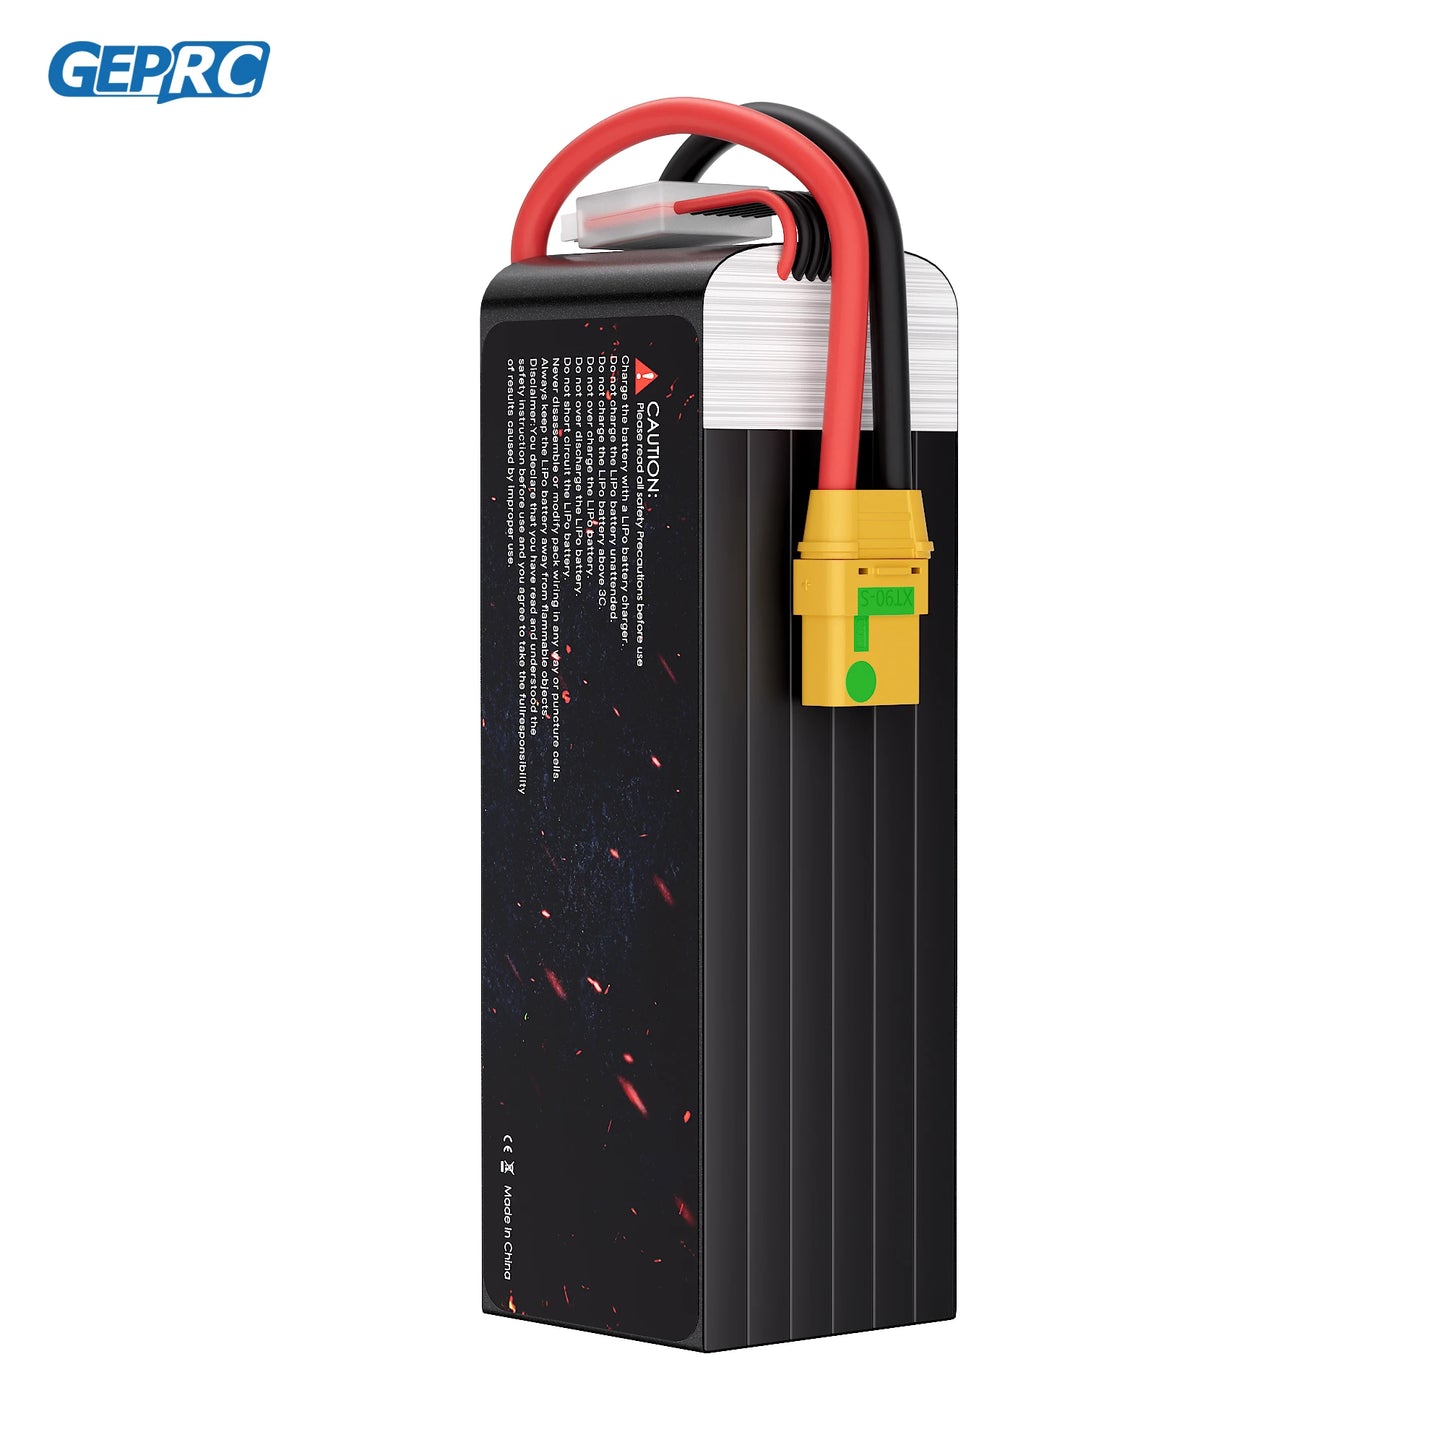 GEPRC Storm 6S 5600mAh 95C Lipo Battery - Suitable for 3-5Inch Series Drone RC FPV Quadcopter Freestyle Drone Accessories Parts